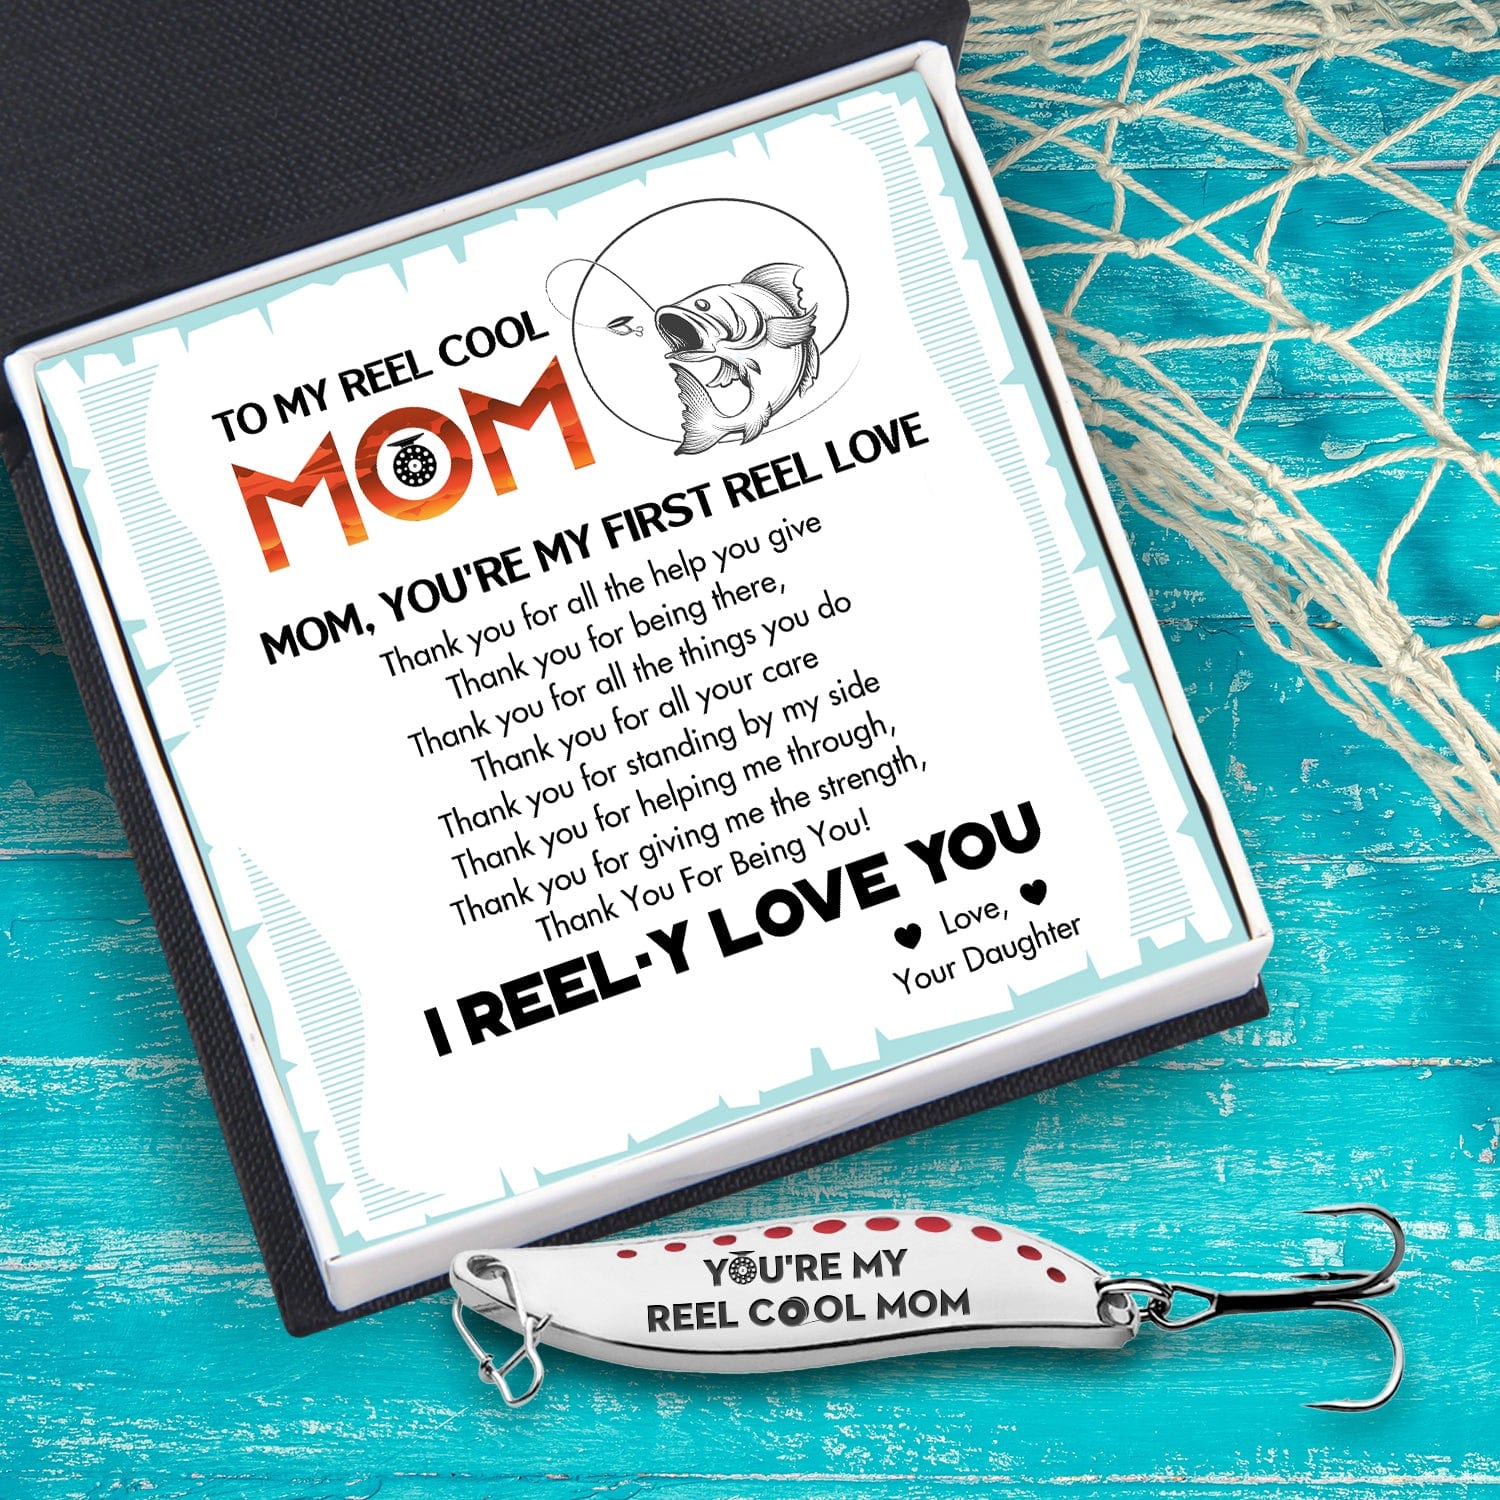 Fishing Lures - Fishing - To My Mom - You're My First Reel Love